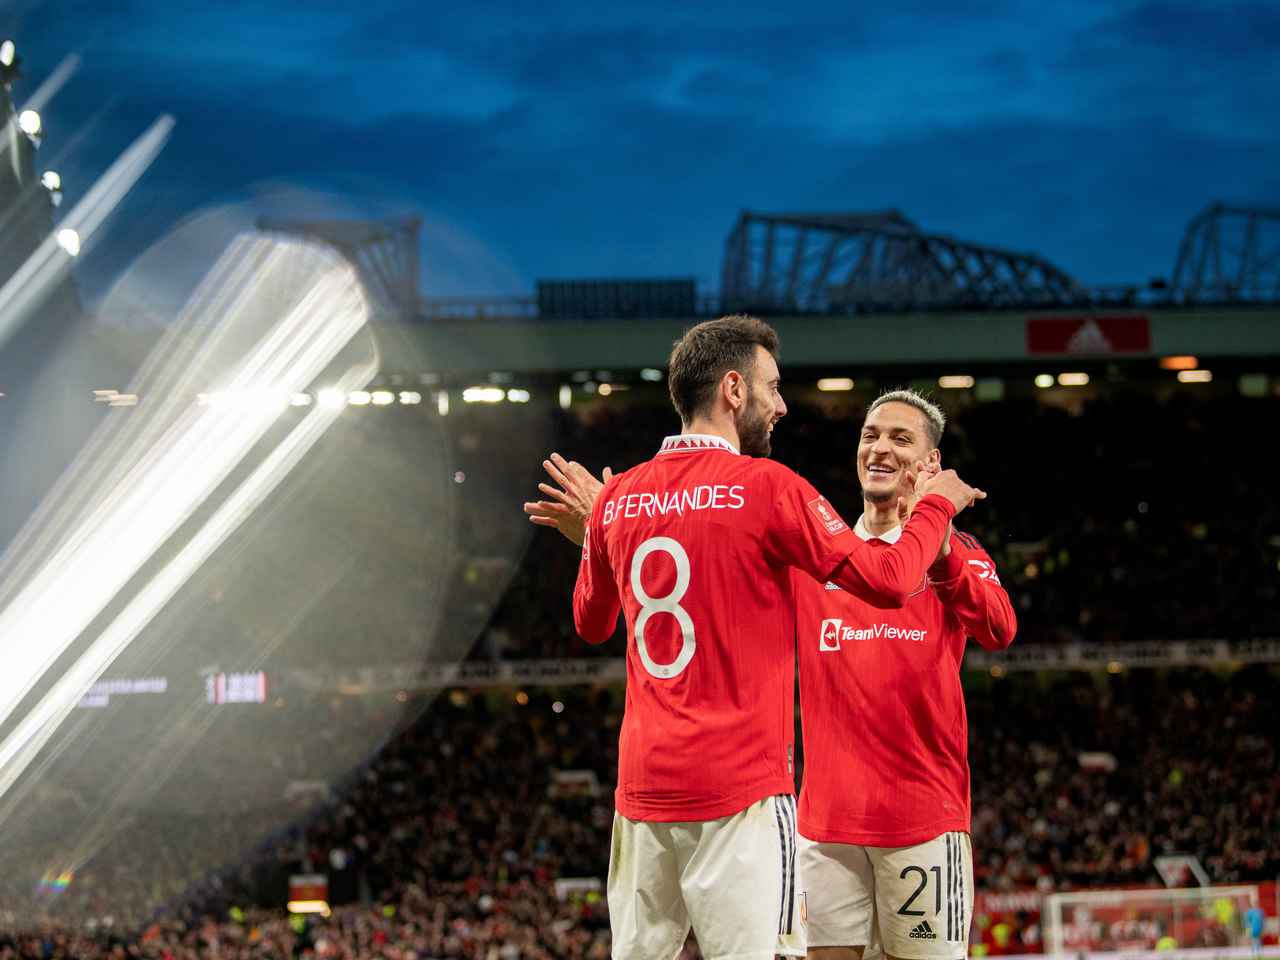 Manchester United on X: 🏆 The FA Cup. It's prestigious. It's inspiring.  It's tradition. Our latest journey starts tonight: come on United! 🔴 #MUFC